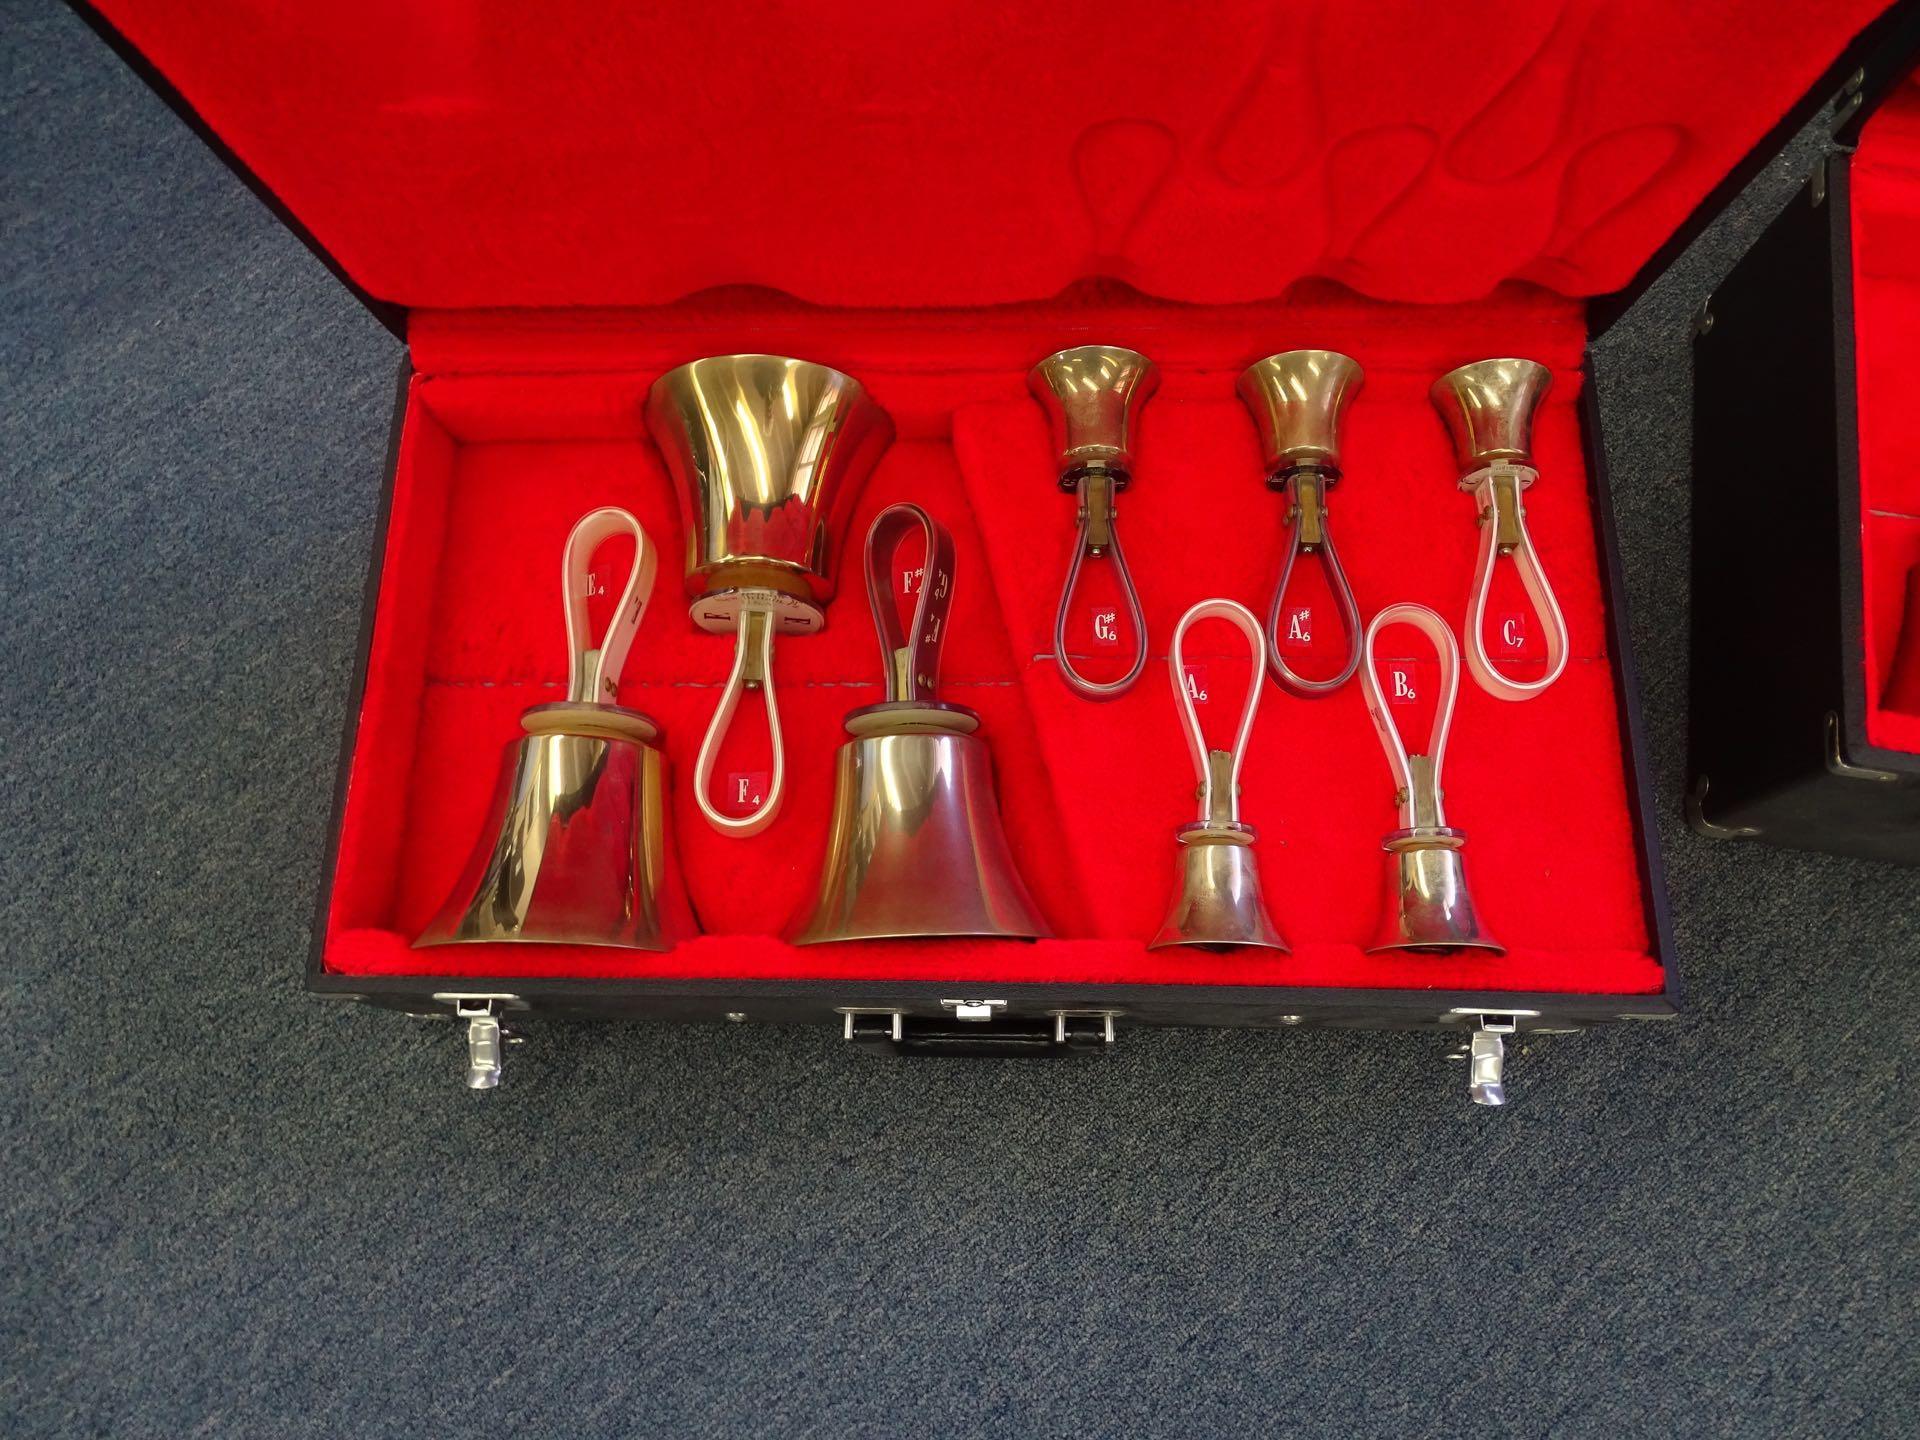 MALMARK 3 OCTAVE HAND BELL SET W/CASES & FOLDING TABLES, PADS, FOLD OUT 3 RING MUSIC HOLDER